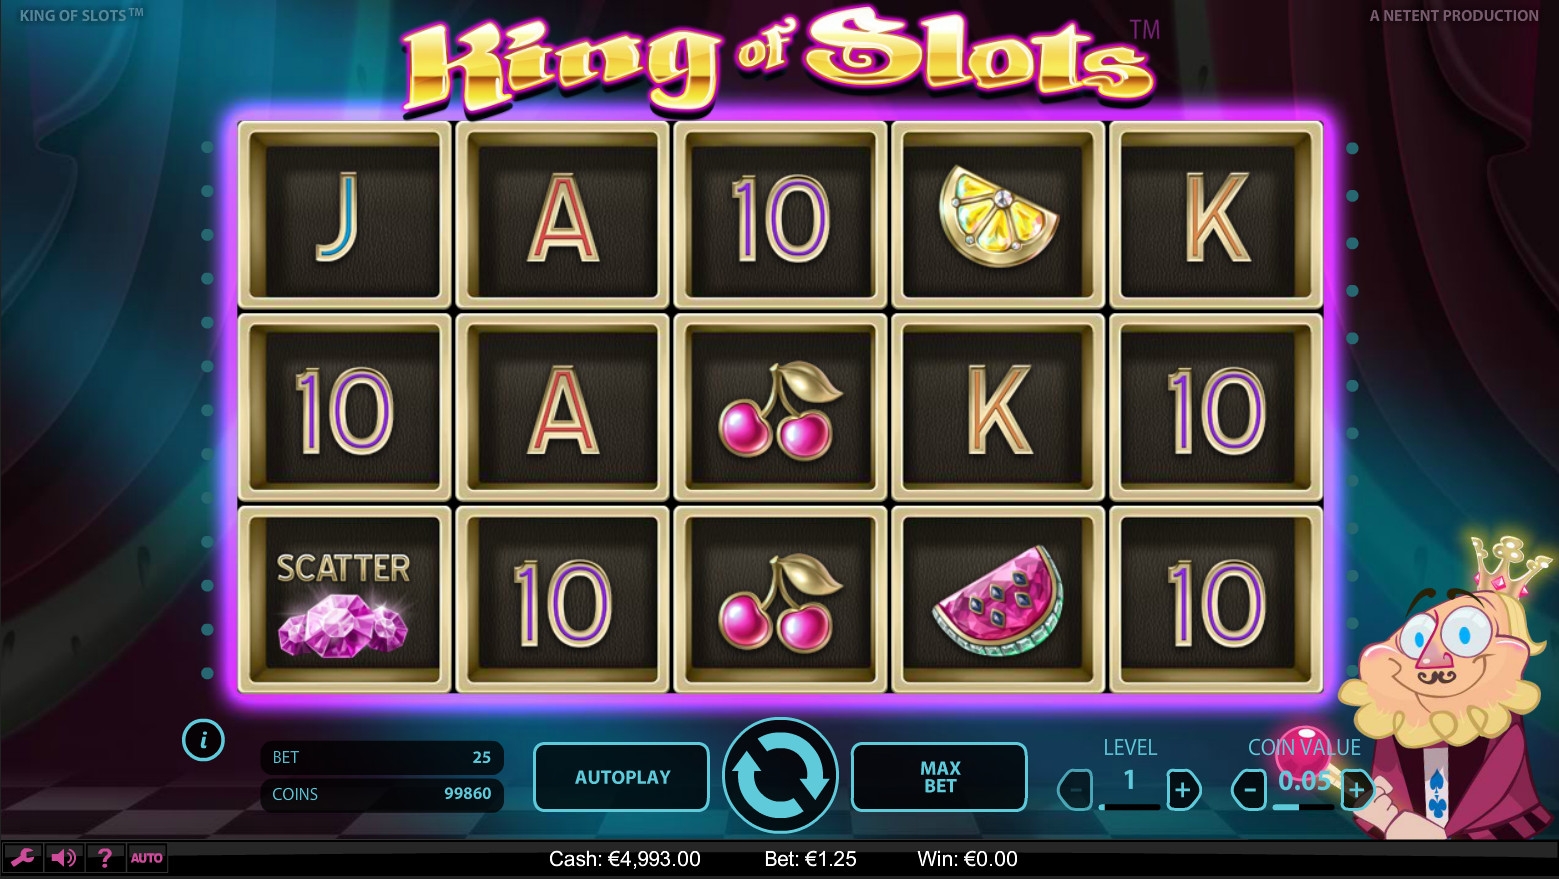 King of Slots (King of Slots) from category Slots